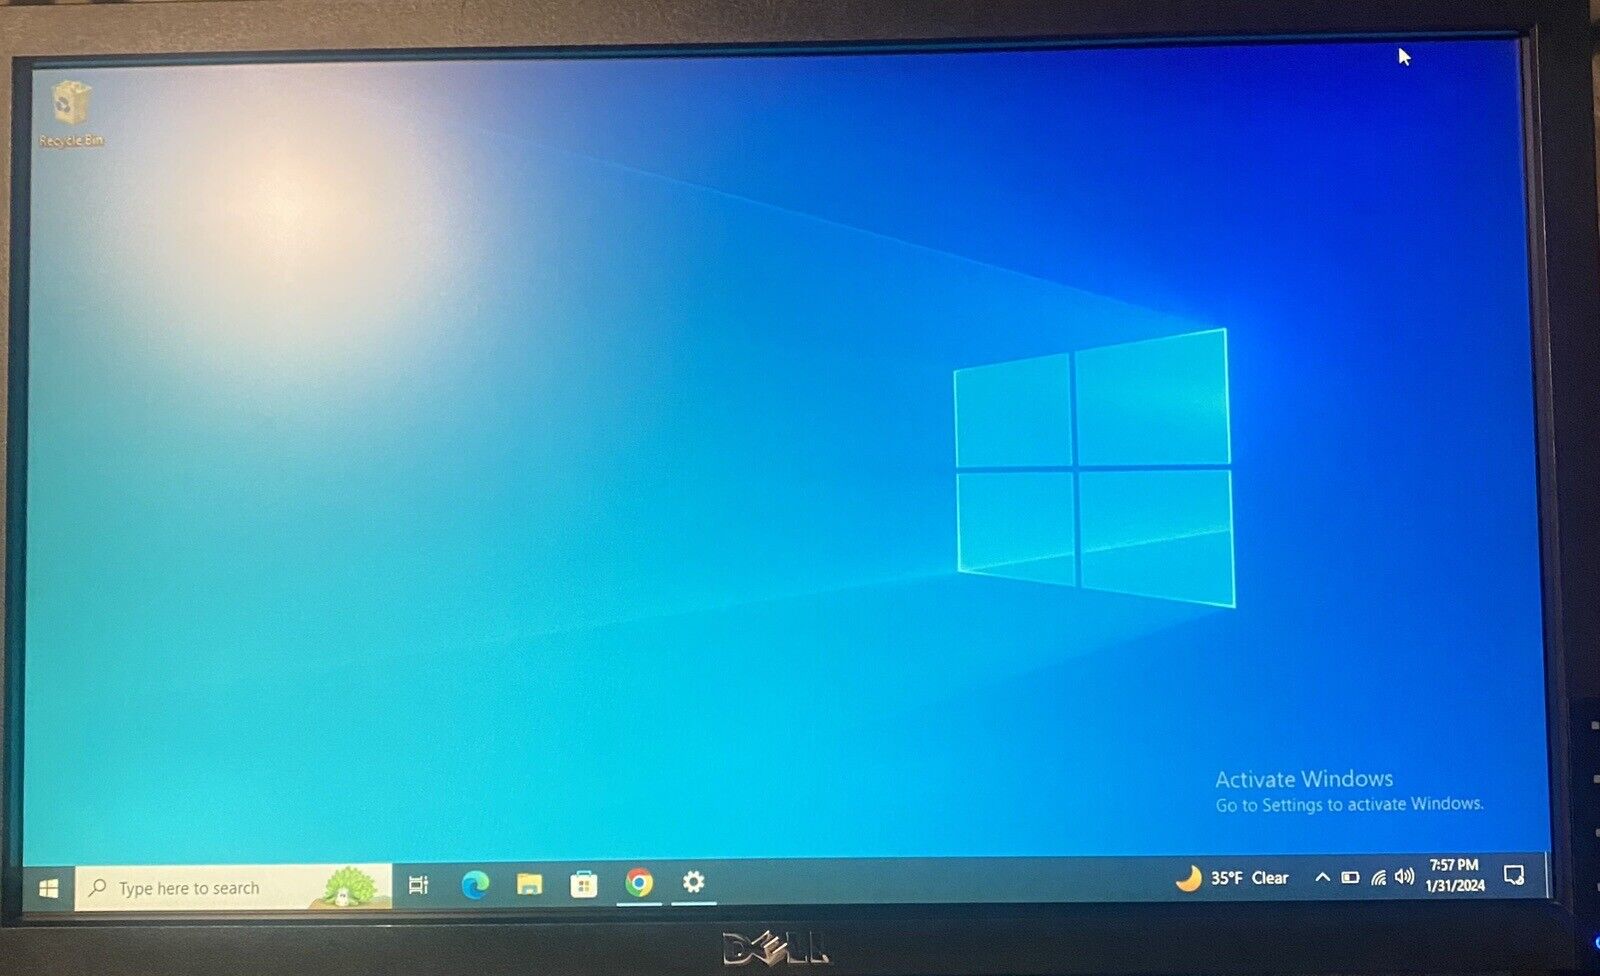 Dell P2010Ht 20” LCD Monitor - 1600 x 900 - W/Power Cable - No Stand